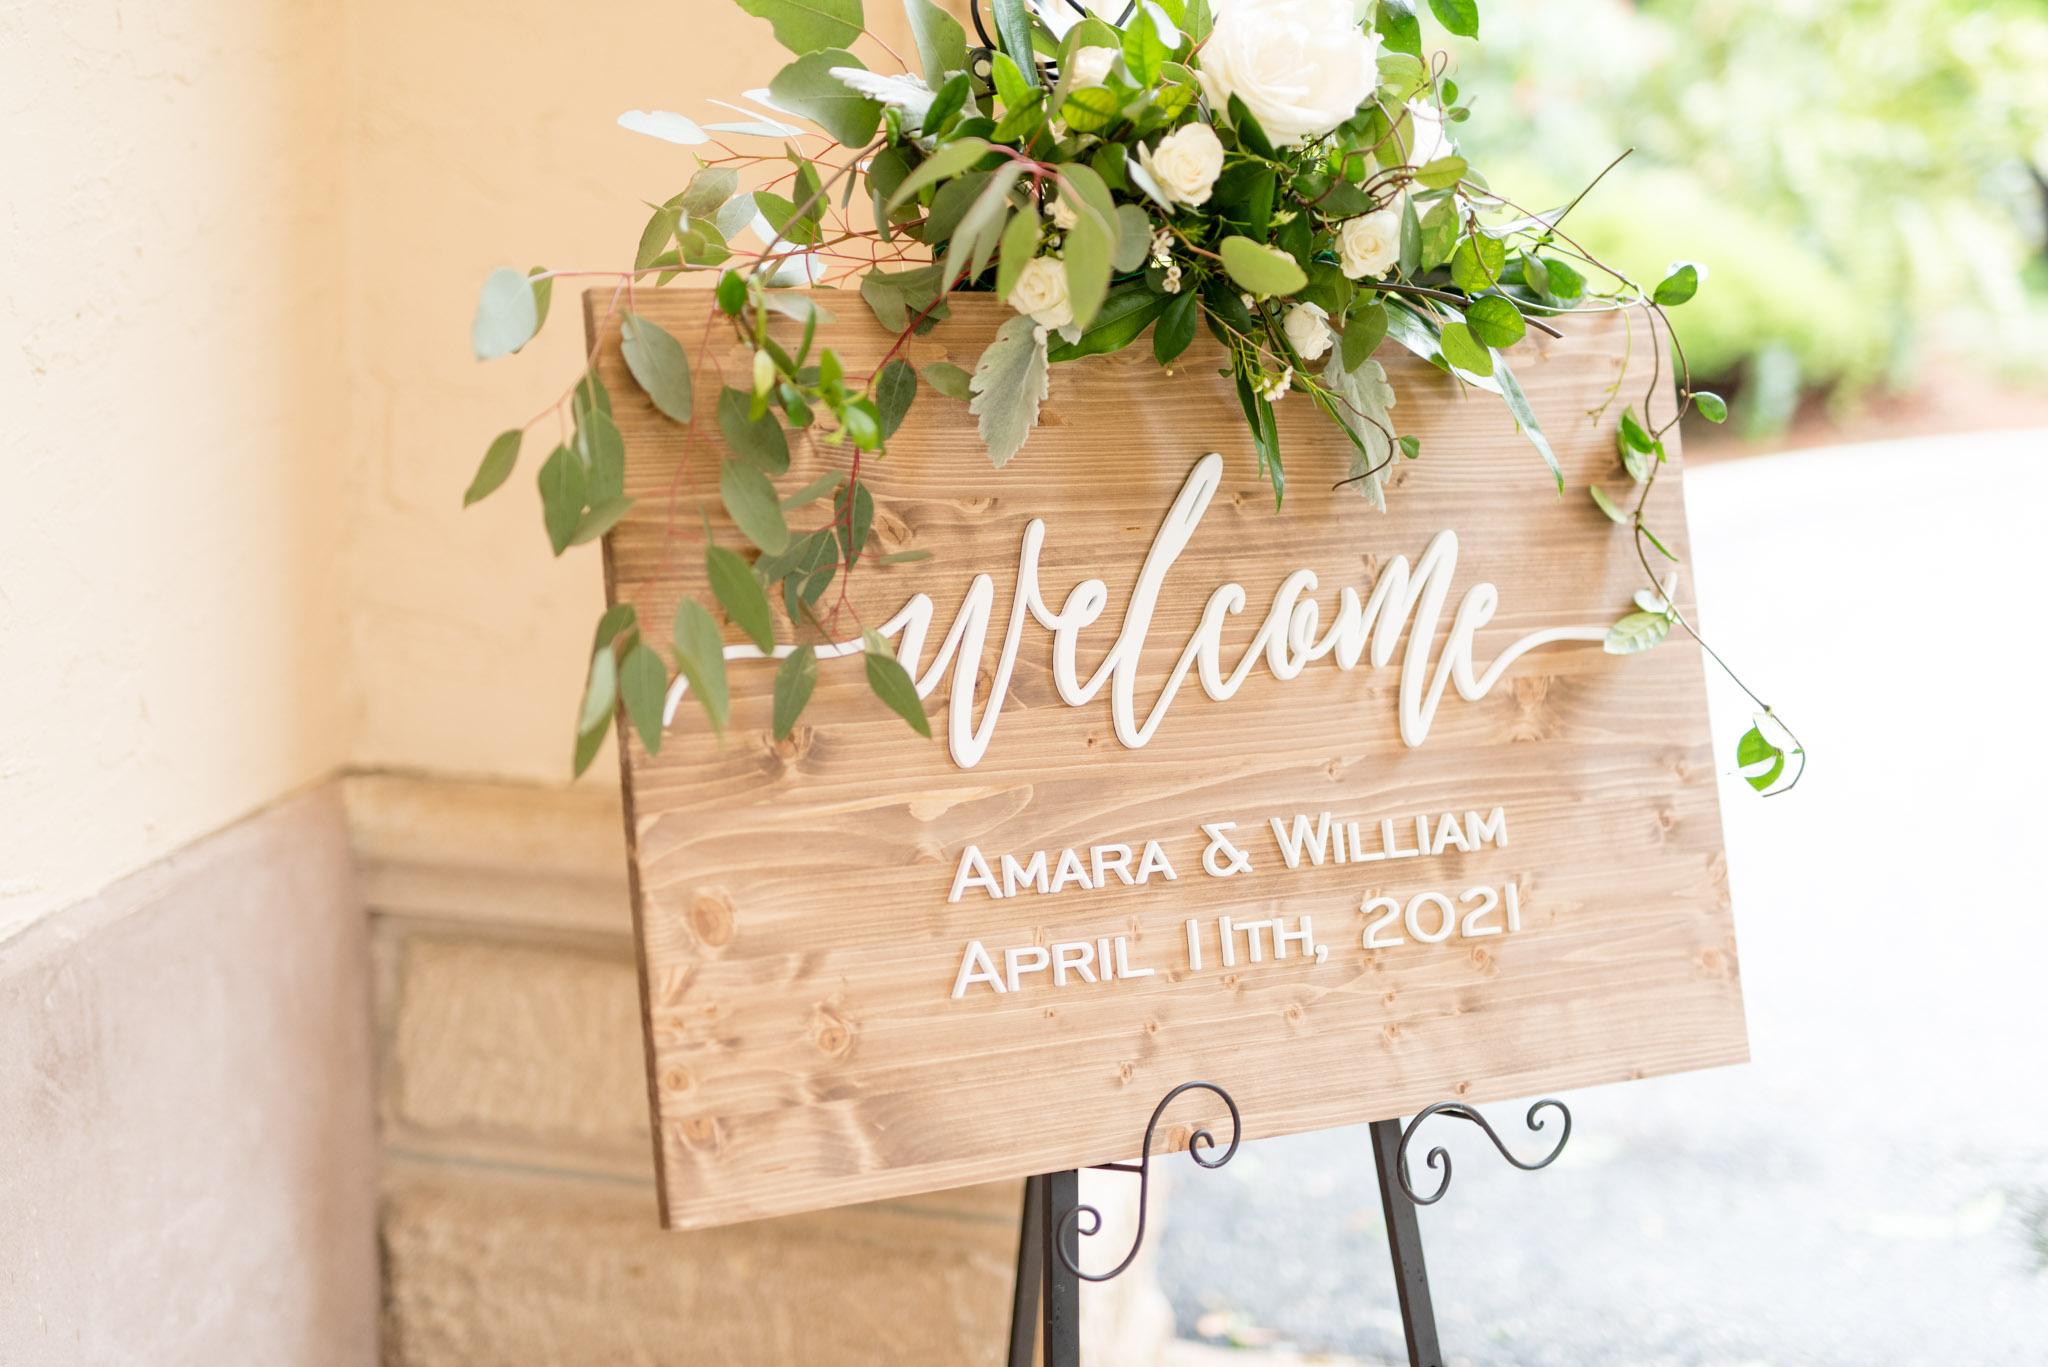 Welcome sign for wedding ceremony.